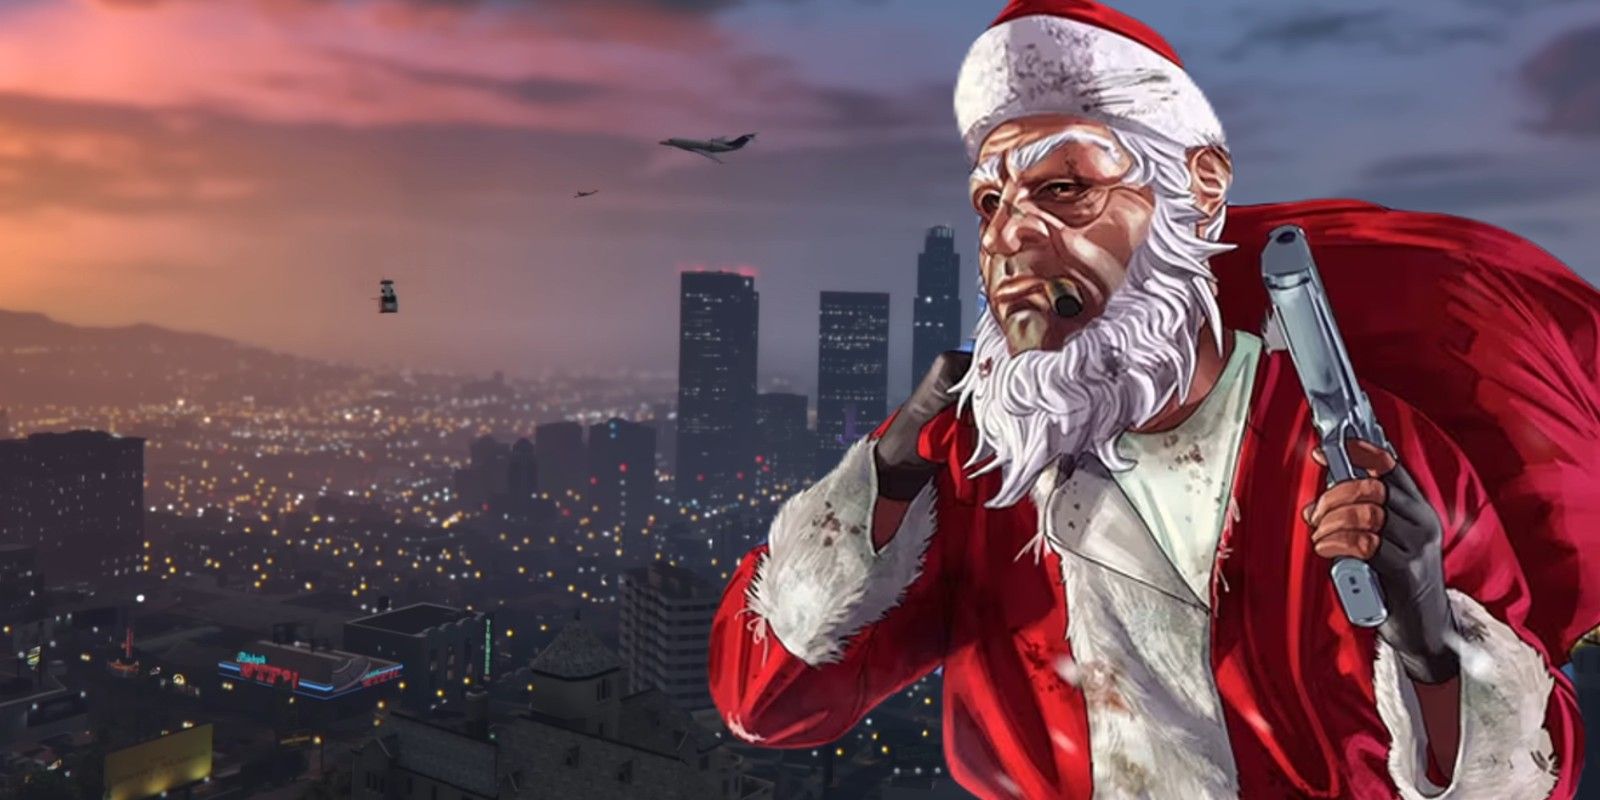 New GTA 6 Leak Teases Holiday Release Date & DLC Plans